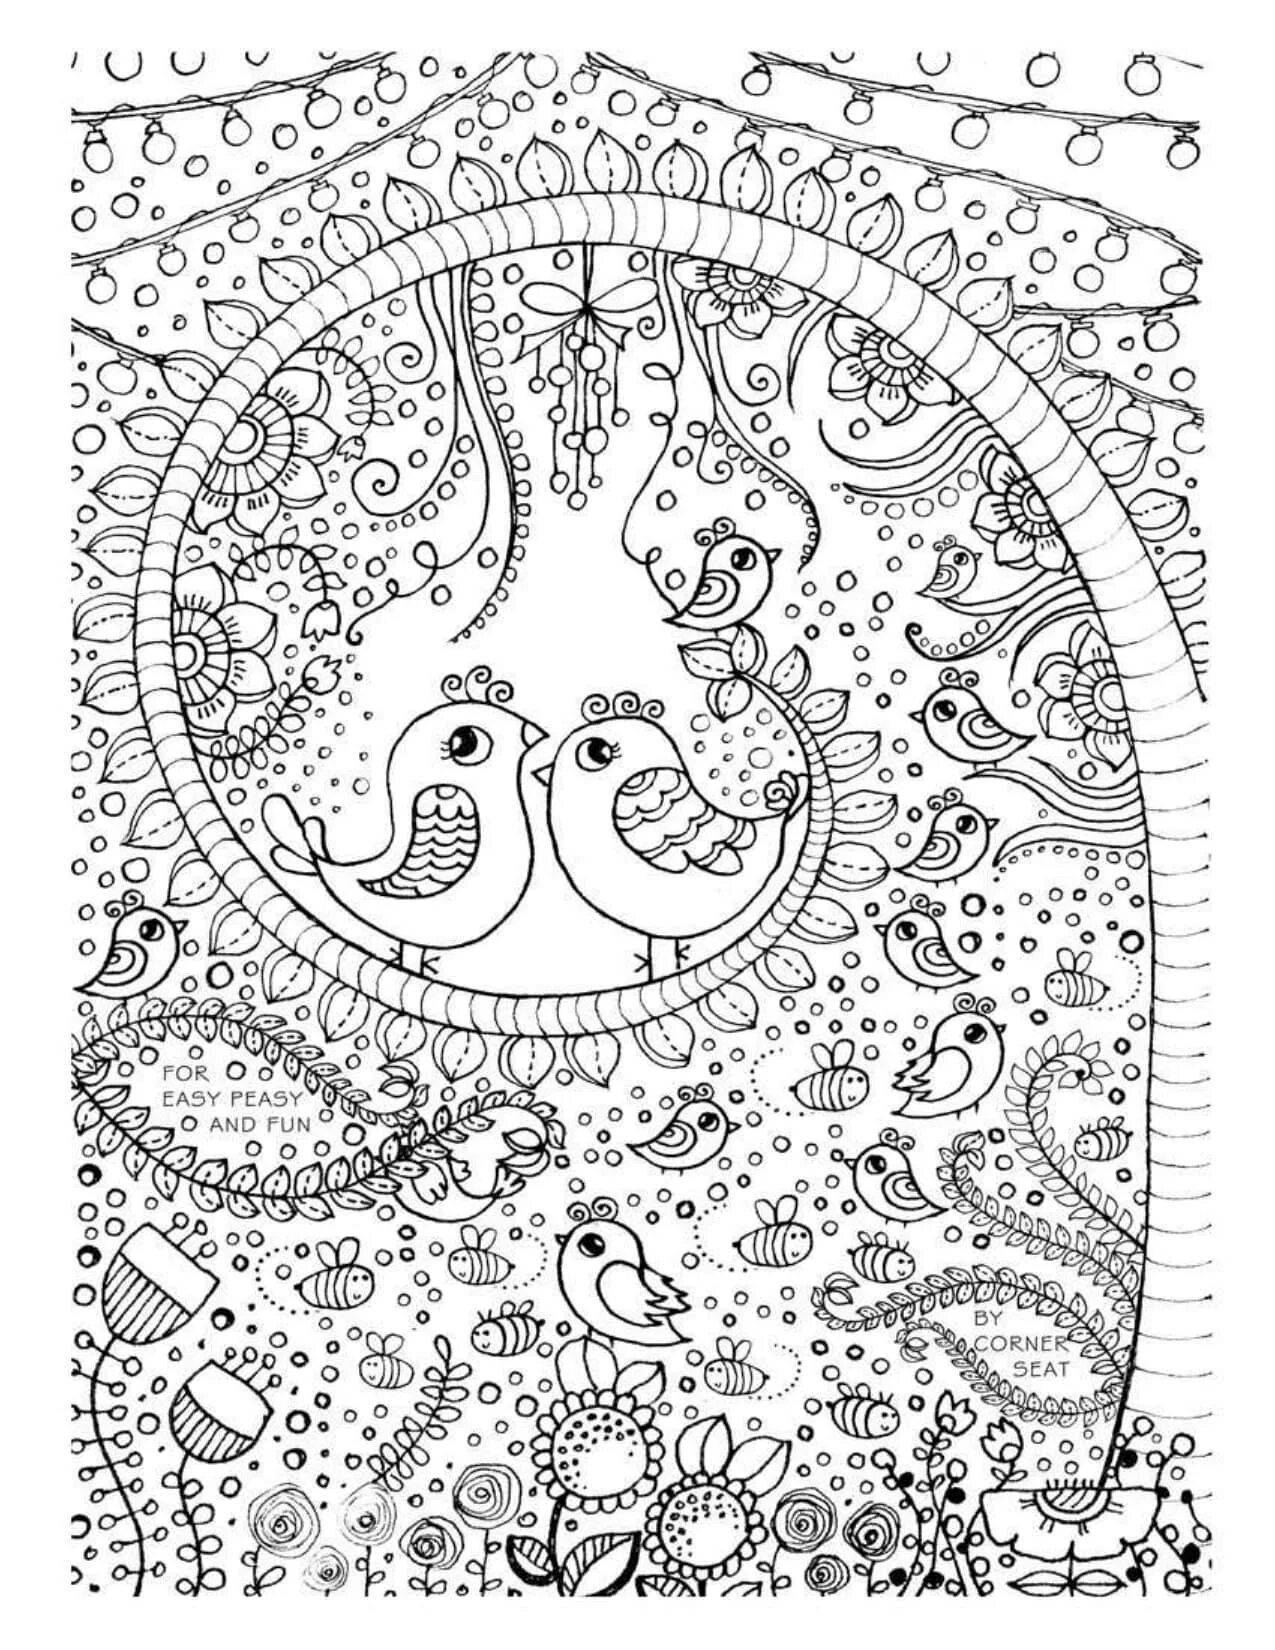 Magic relaxation coloring book for kids